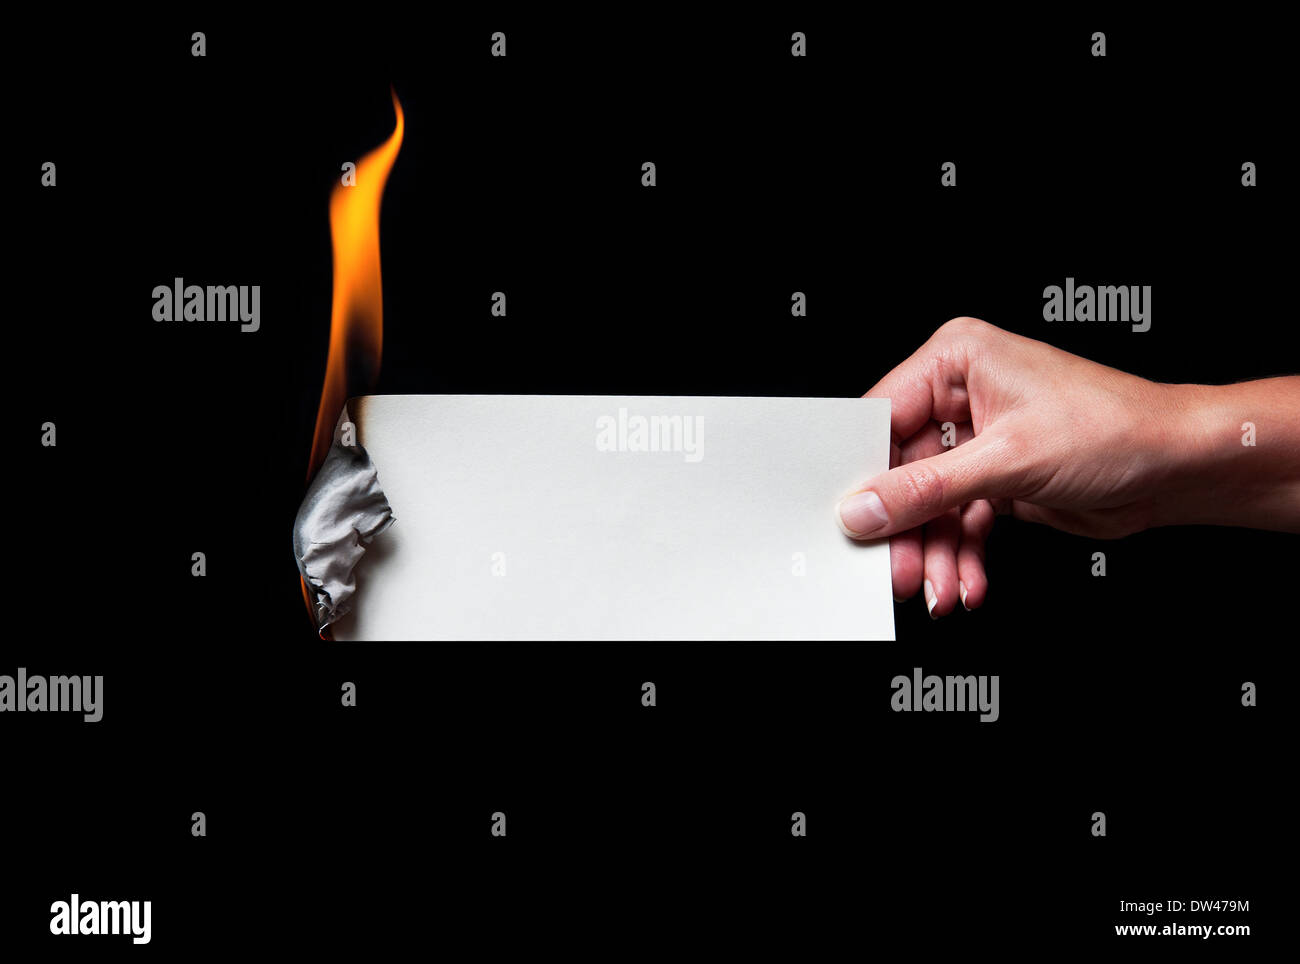 Woman's hand holding a burning paper - enter own caption. Stock Photo